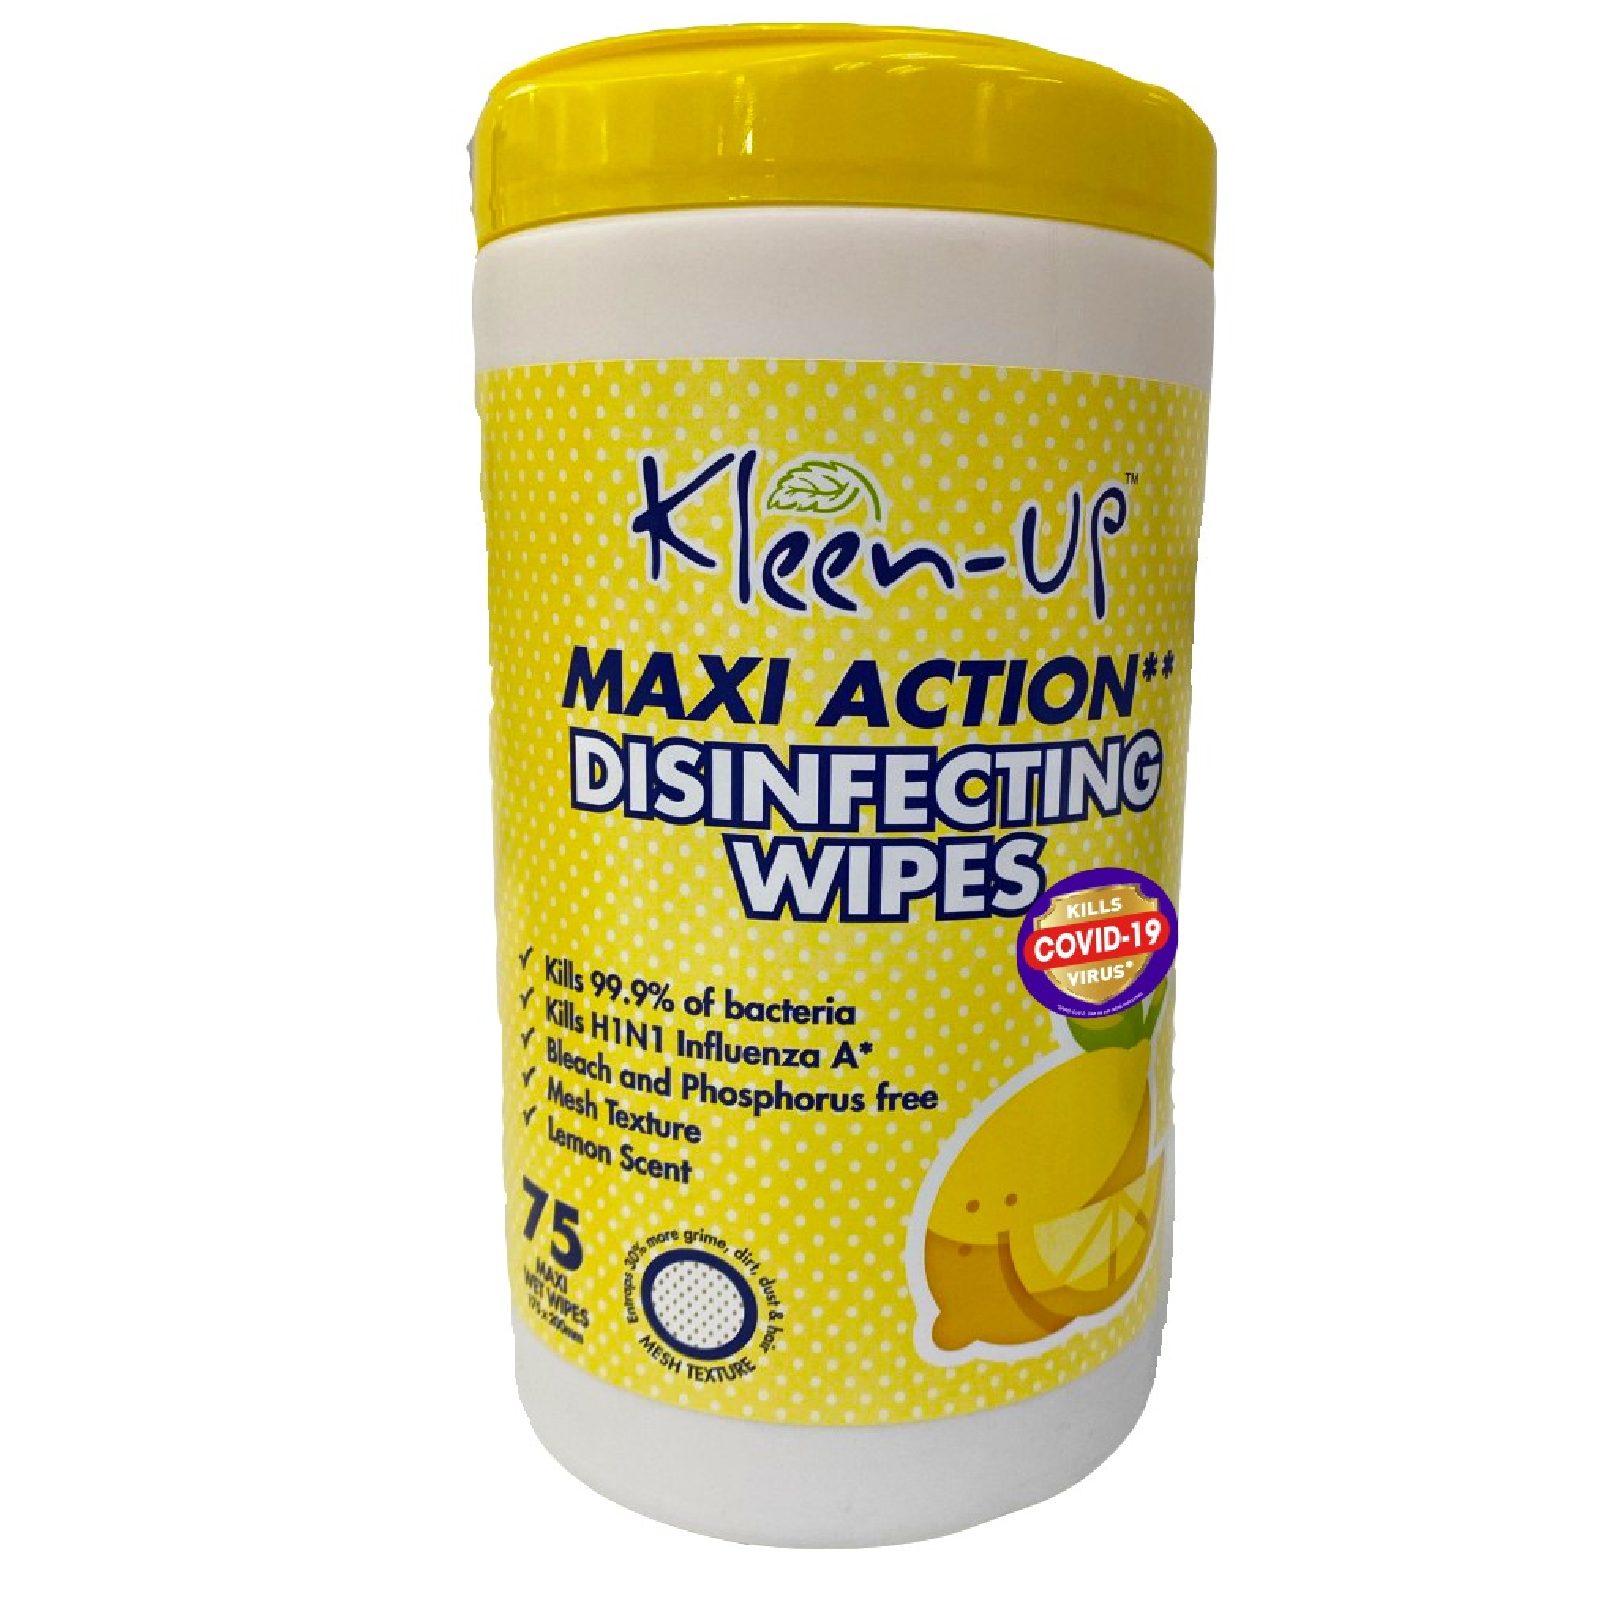 KLEEN-UP Maxi Action DISINFECTING WIPES 75s LEMON SCENTED